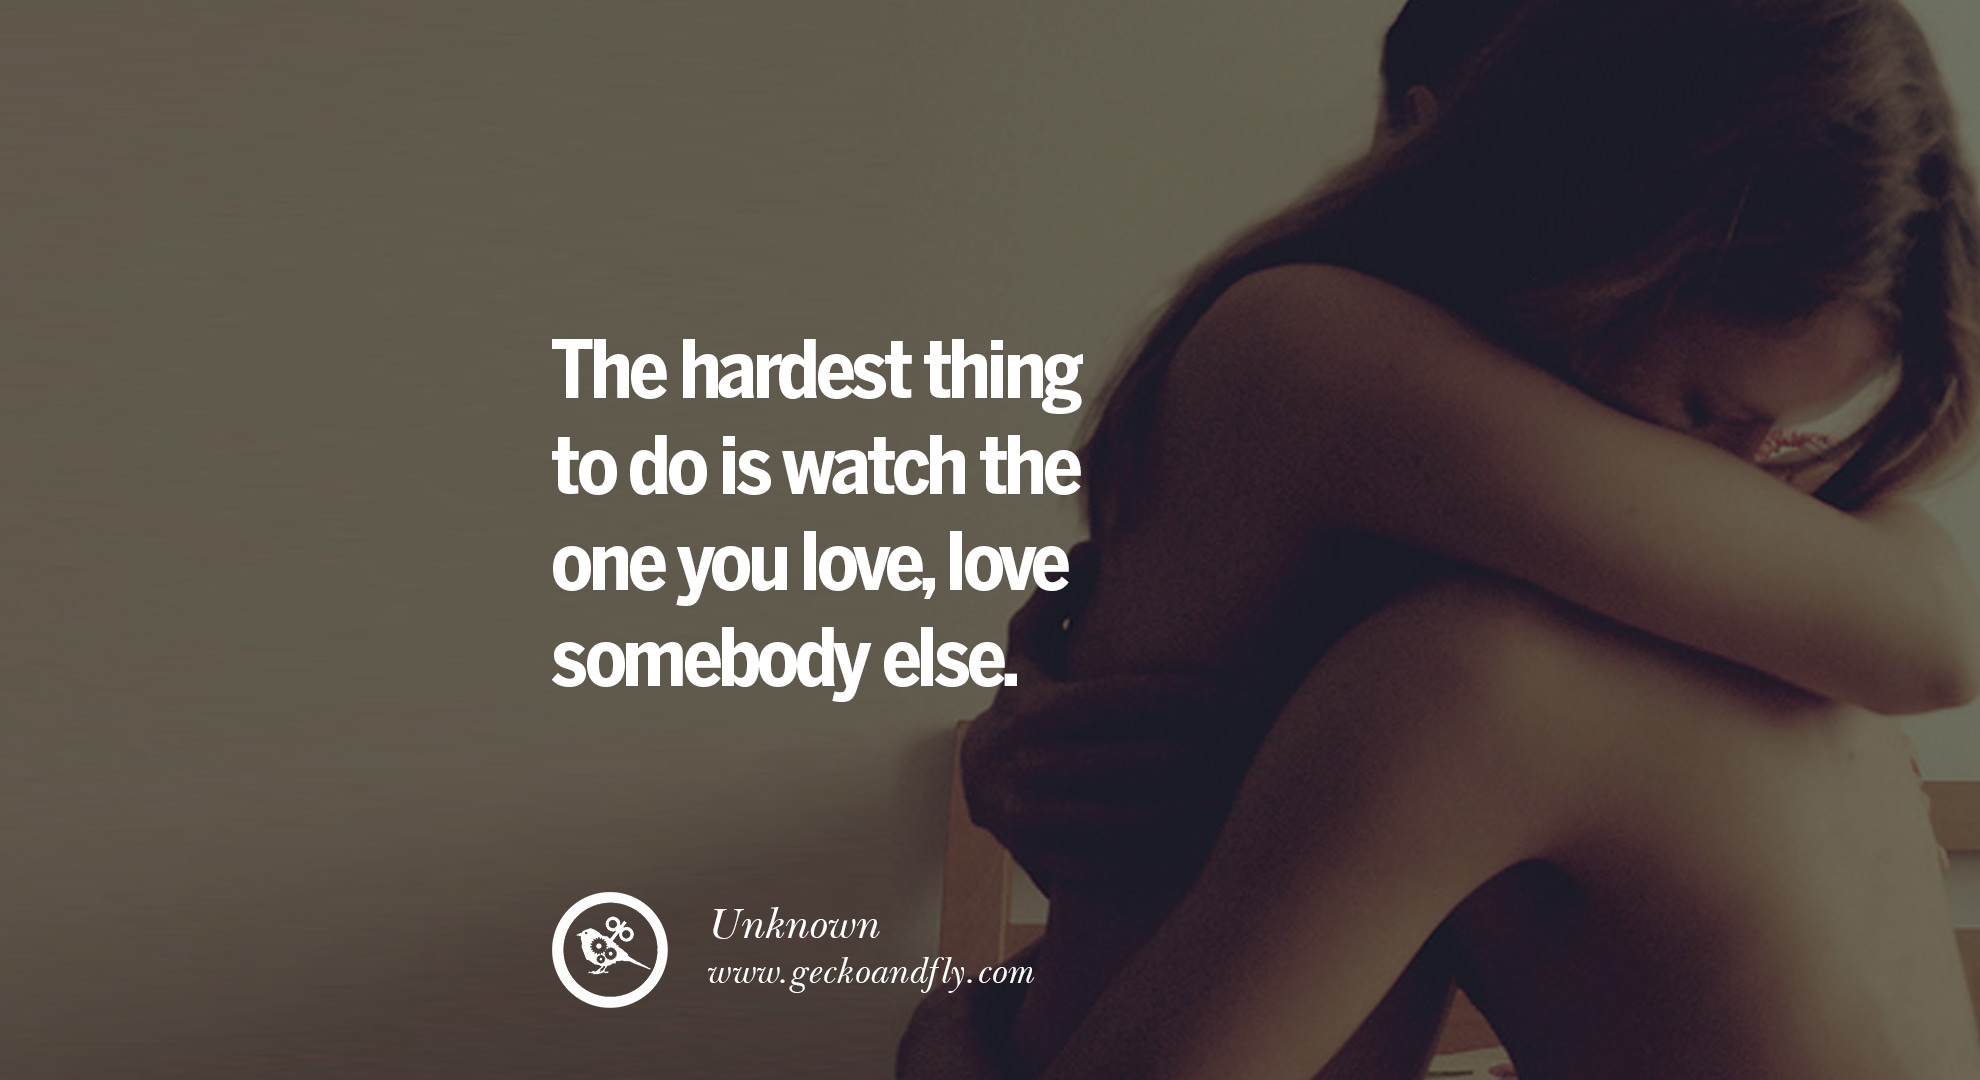 40 Romantic Quotes about Love Life, Marriage and Relationships